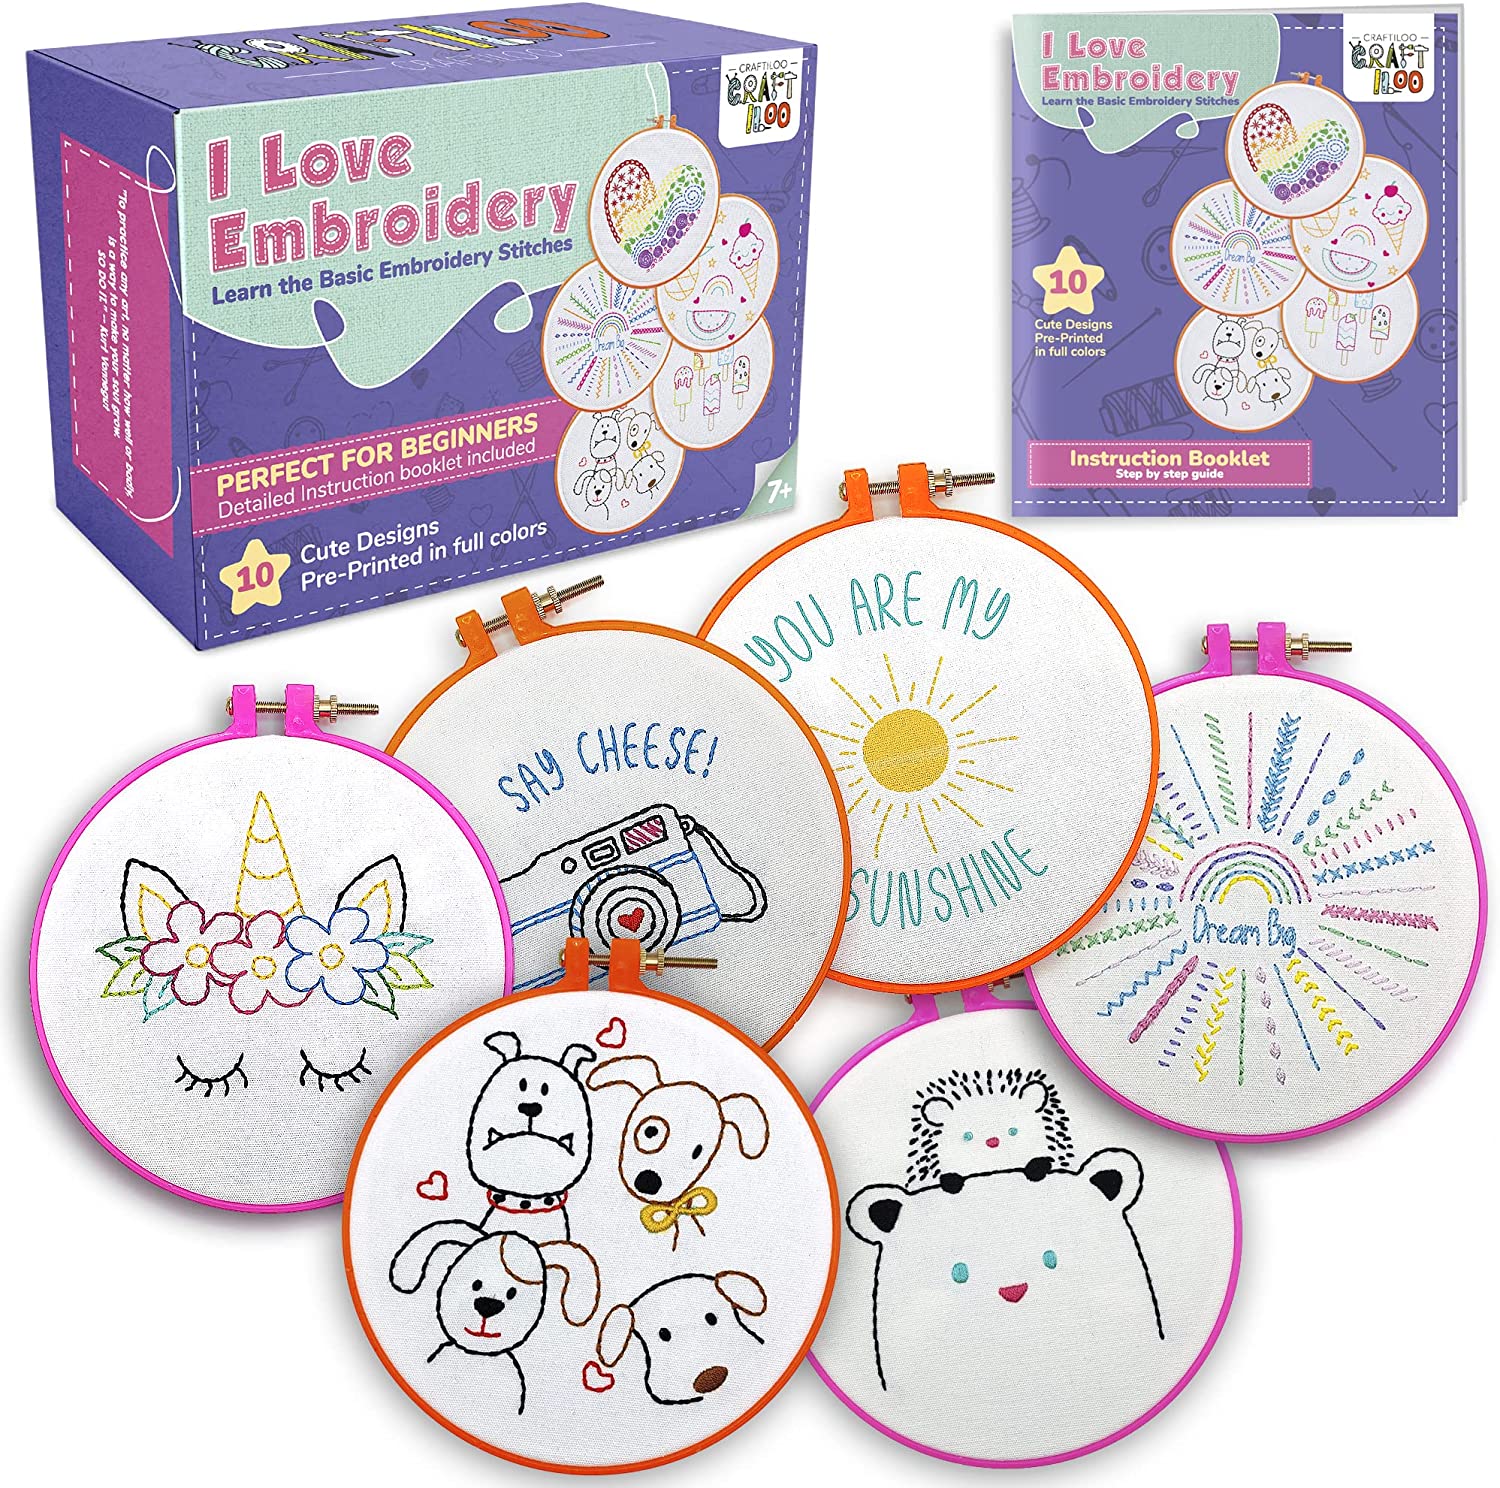 Embroidery Kit Squirrel Floral Design Flower Garden Awesocrafts Full Range  of Embroidery Starter Kits for Beginners Adults Kids DIY Handmade Easy